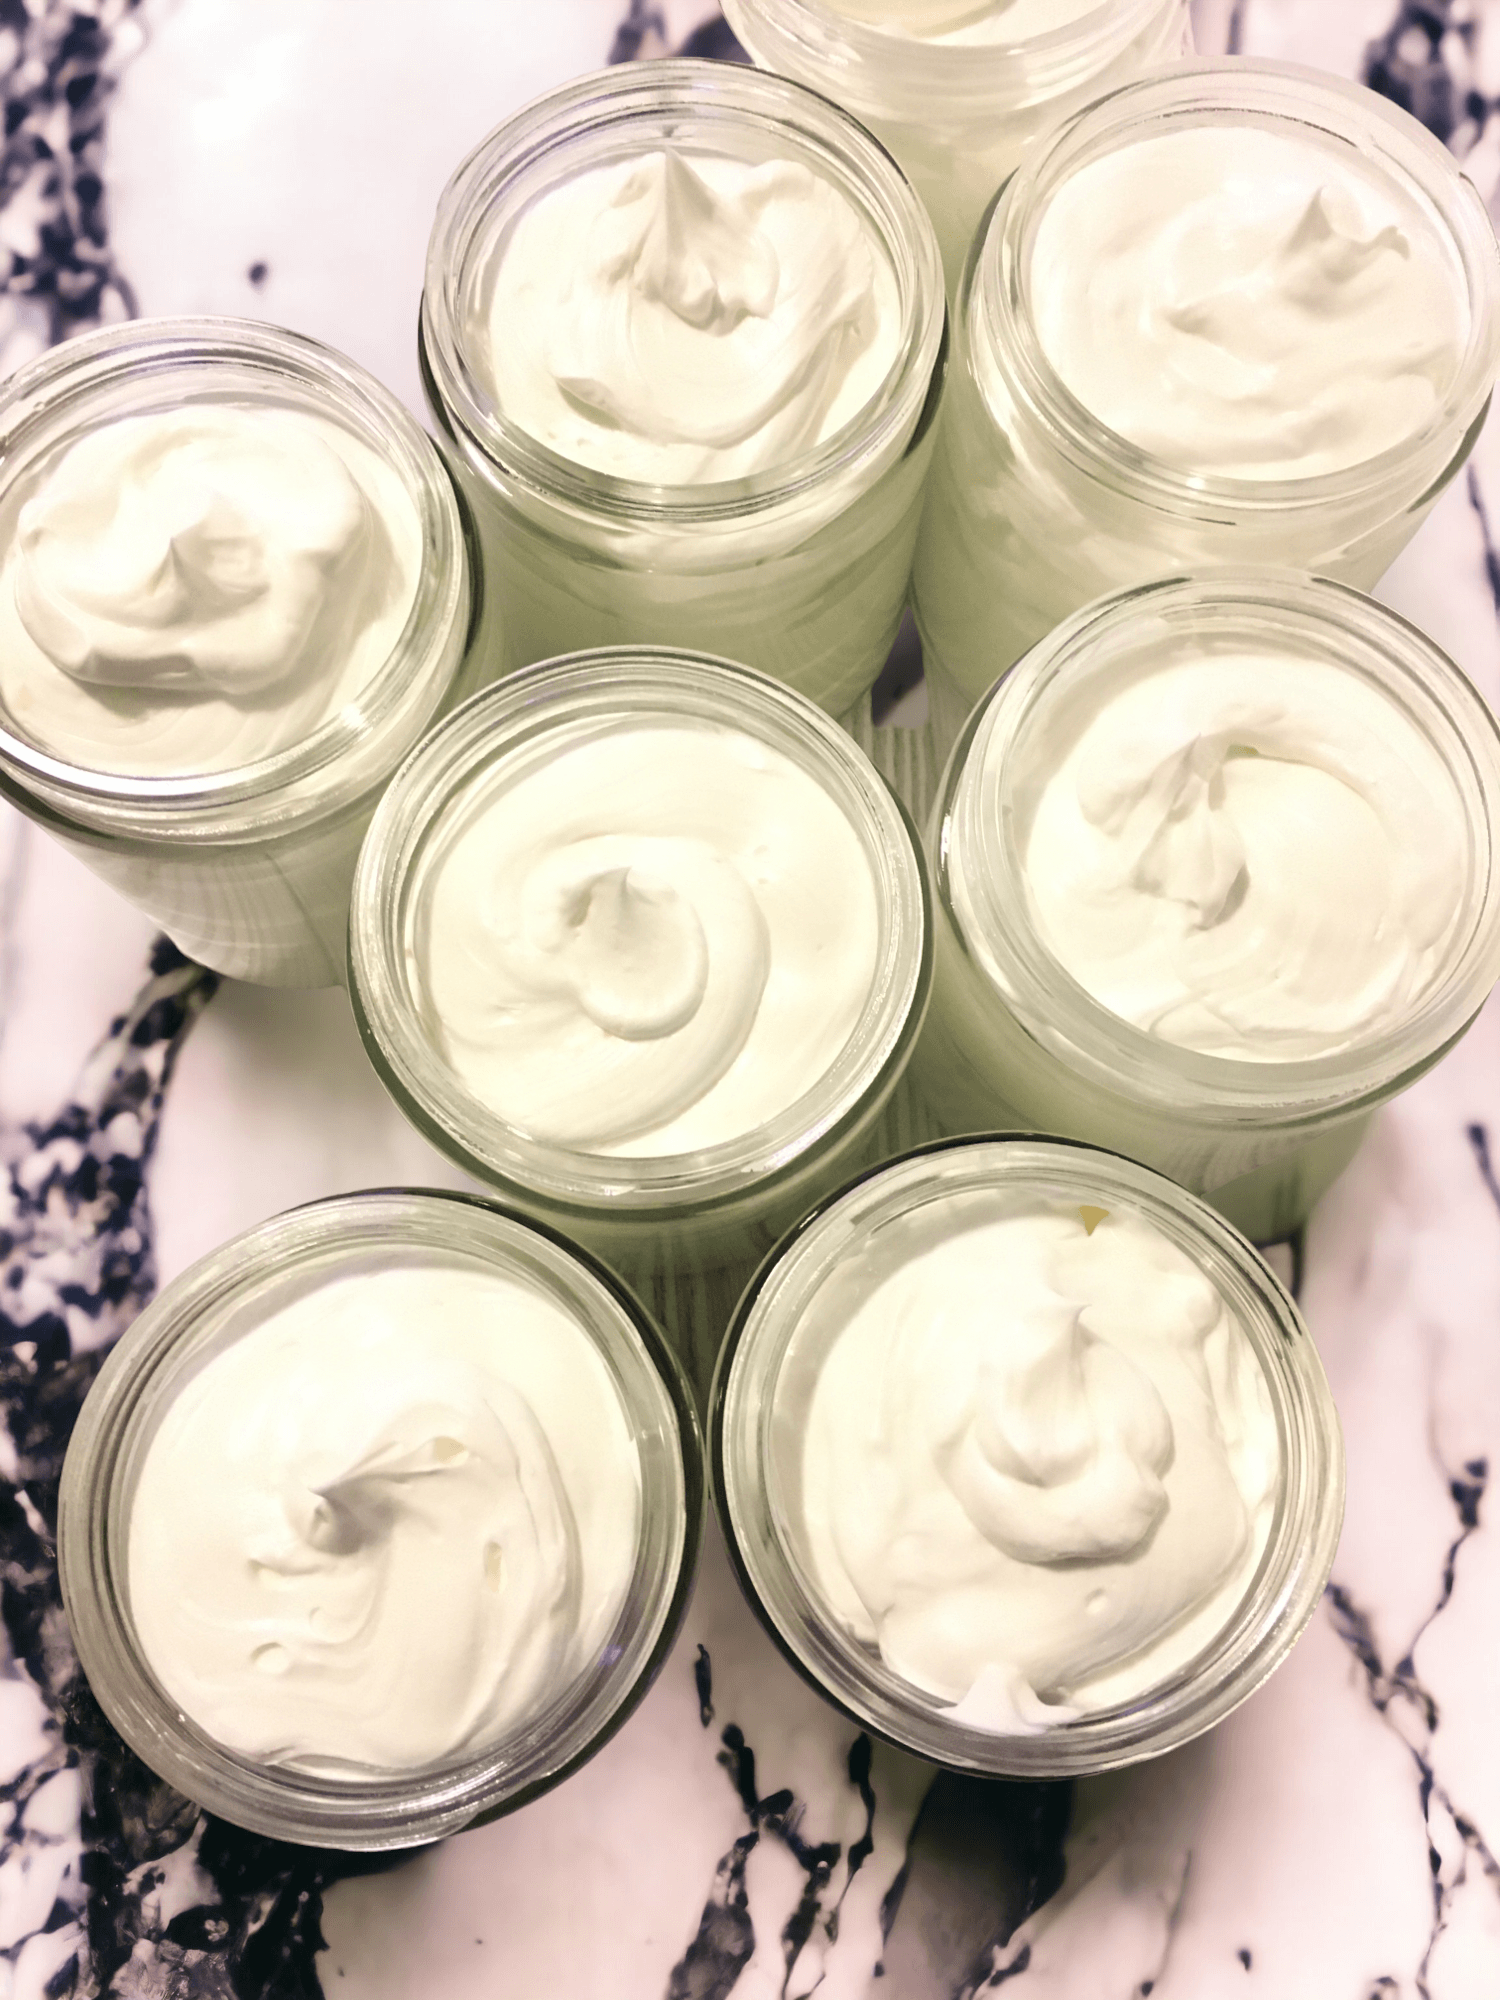 Wholesale Whipped Body Butter Private Label - Elite Creed Natural